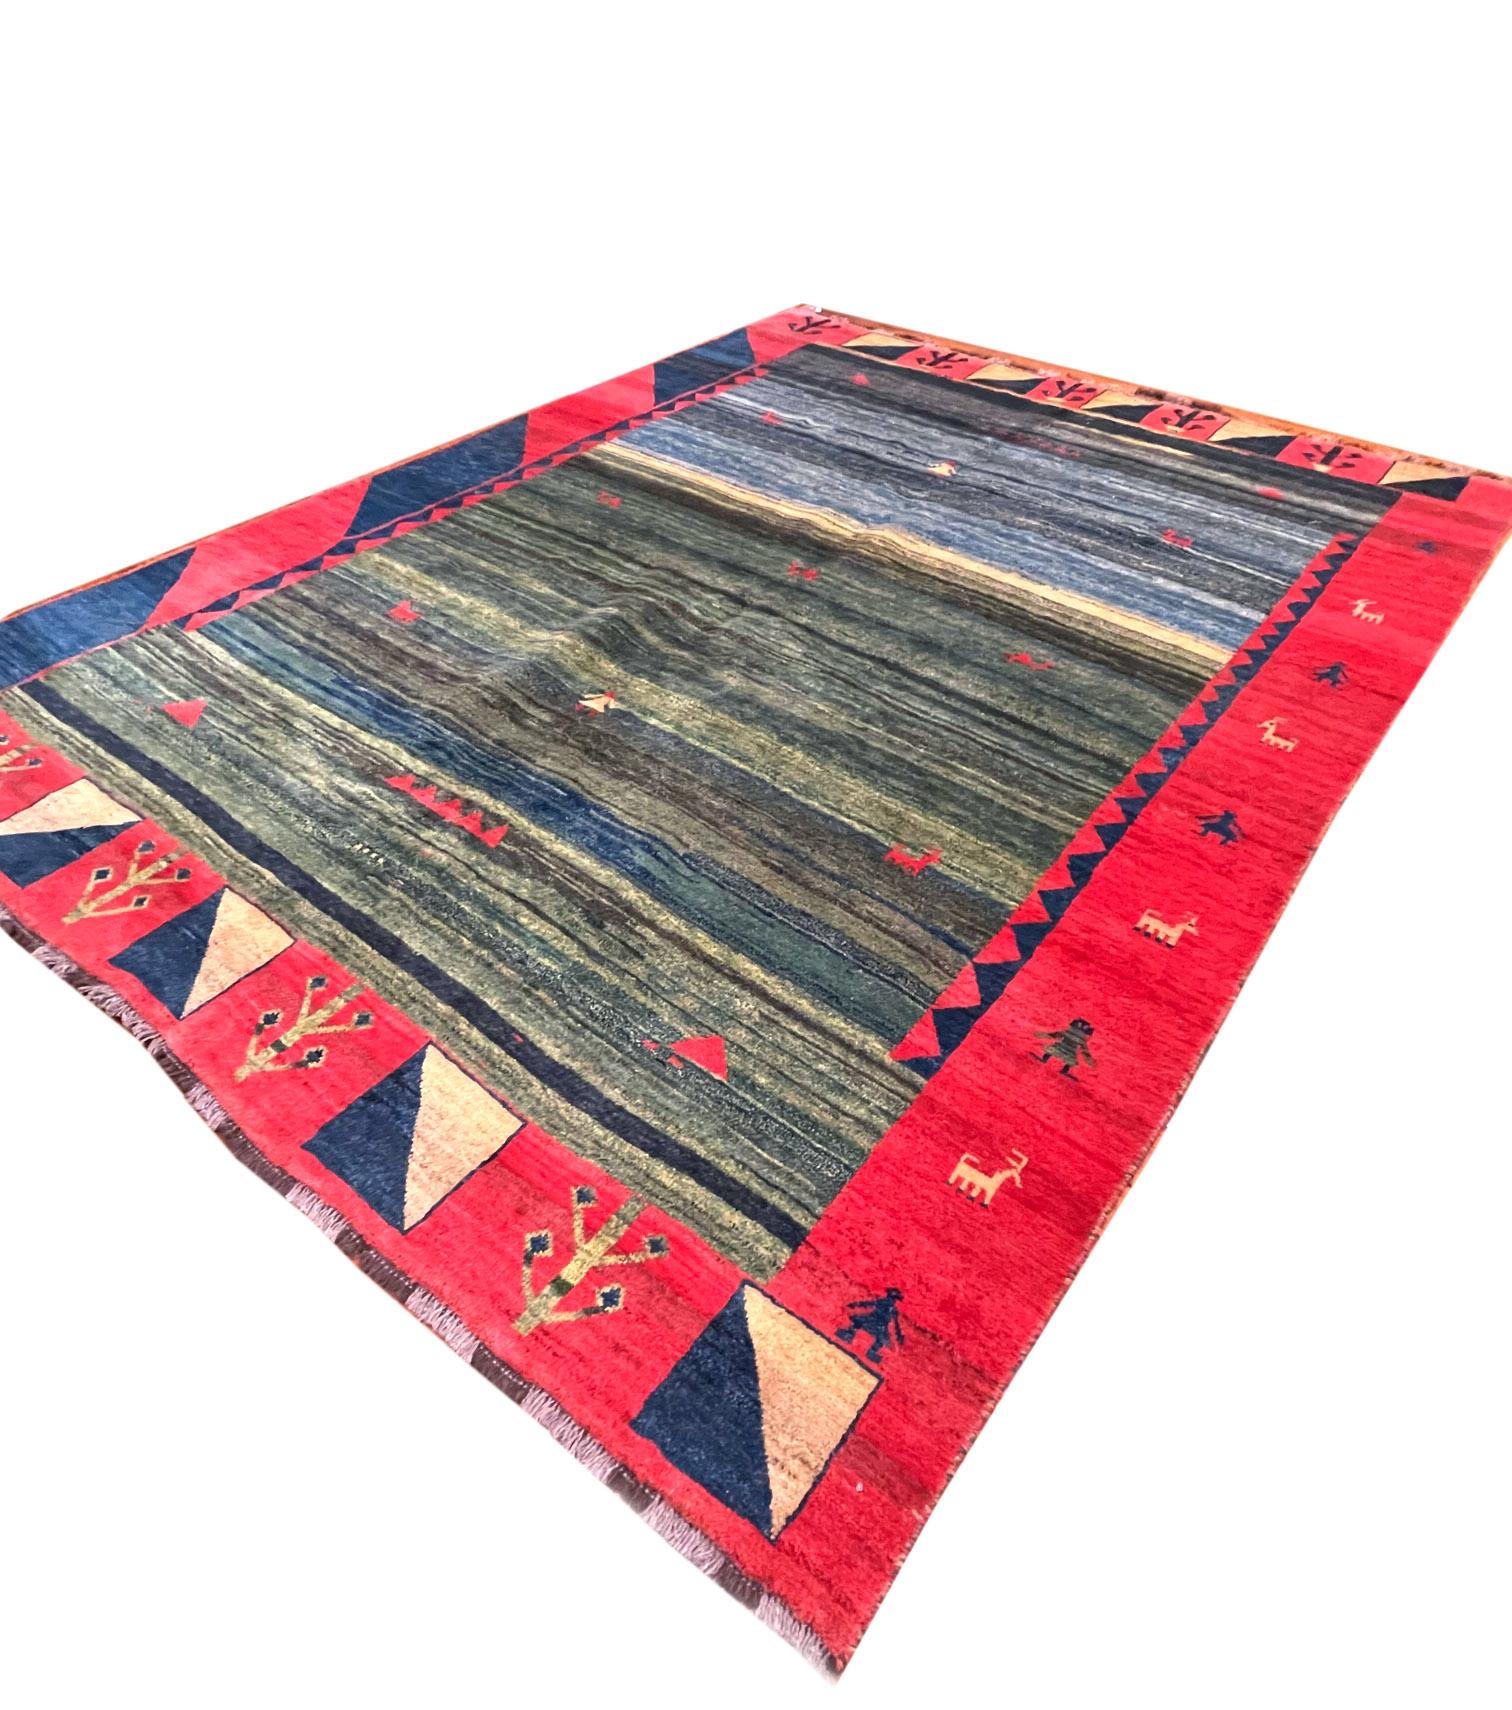  Authentic Persian Shiraz Hand Knotted Tribal Red Blue Green Gabbeh For Sale 4